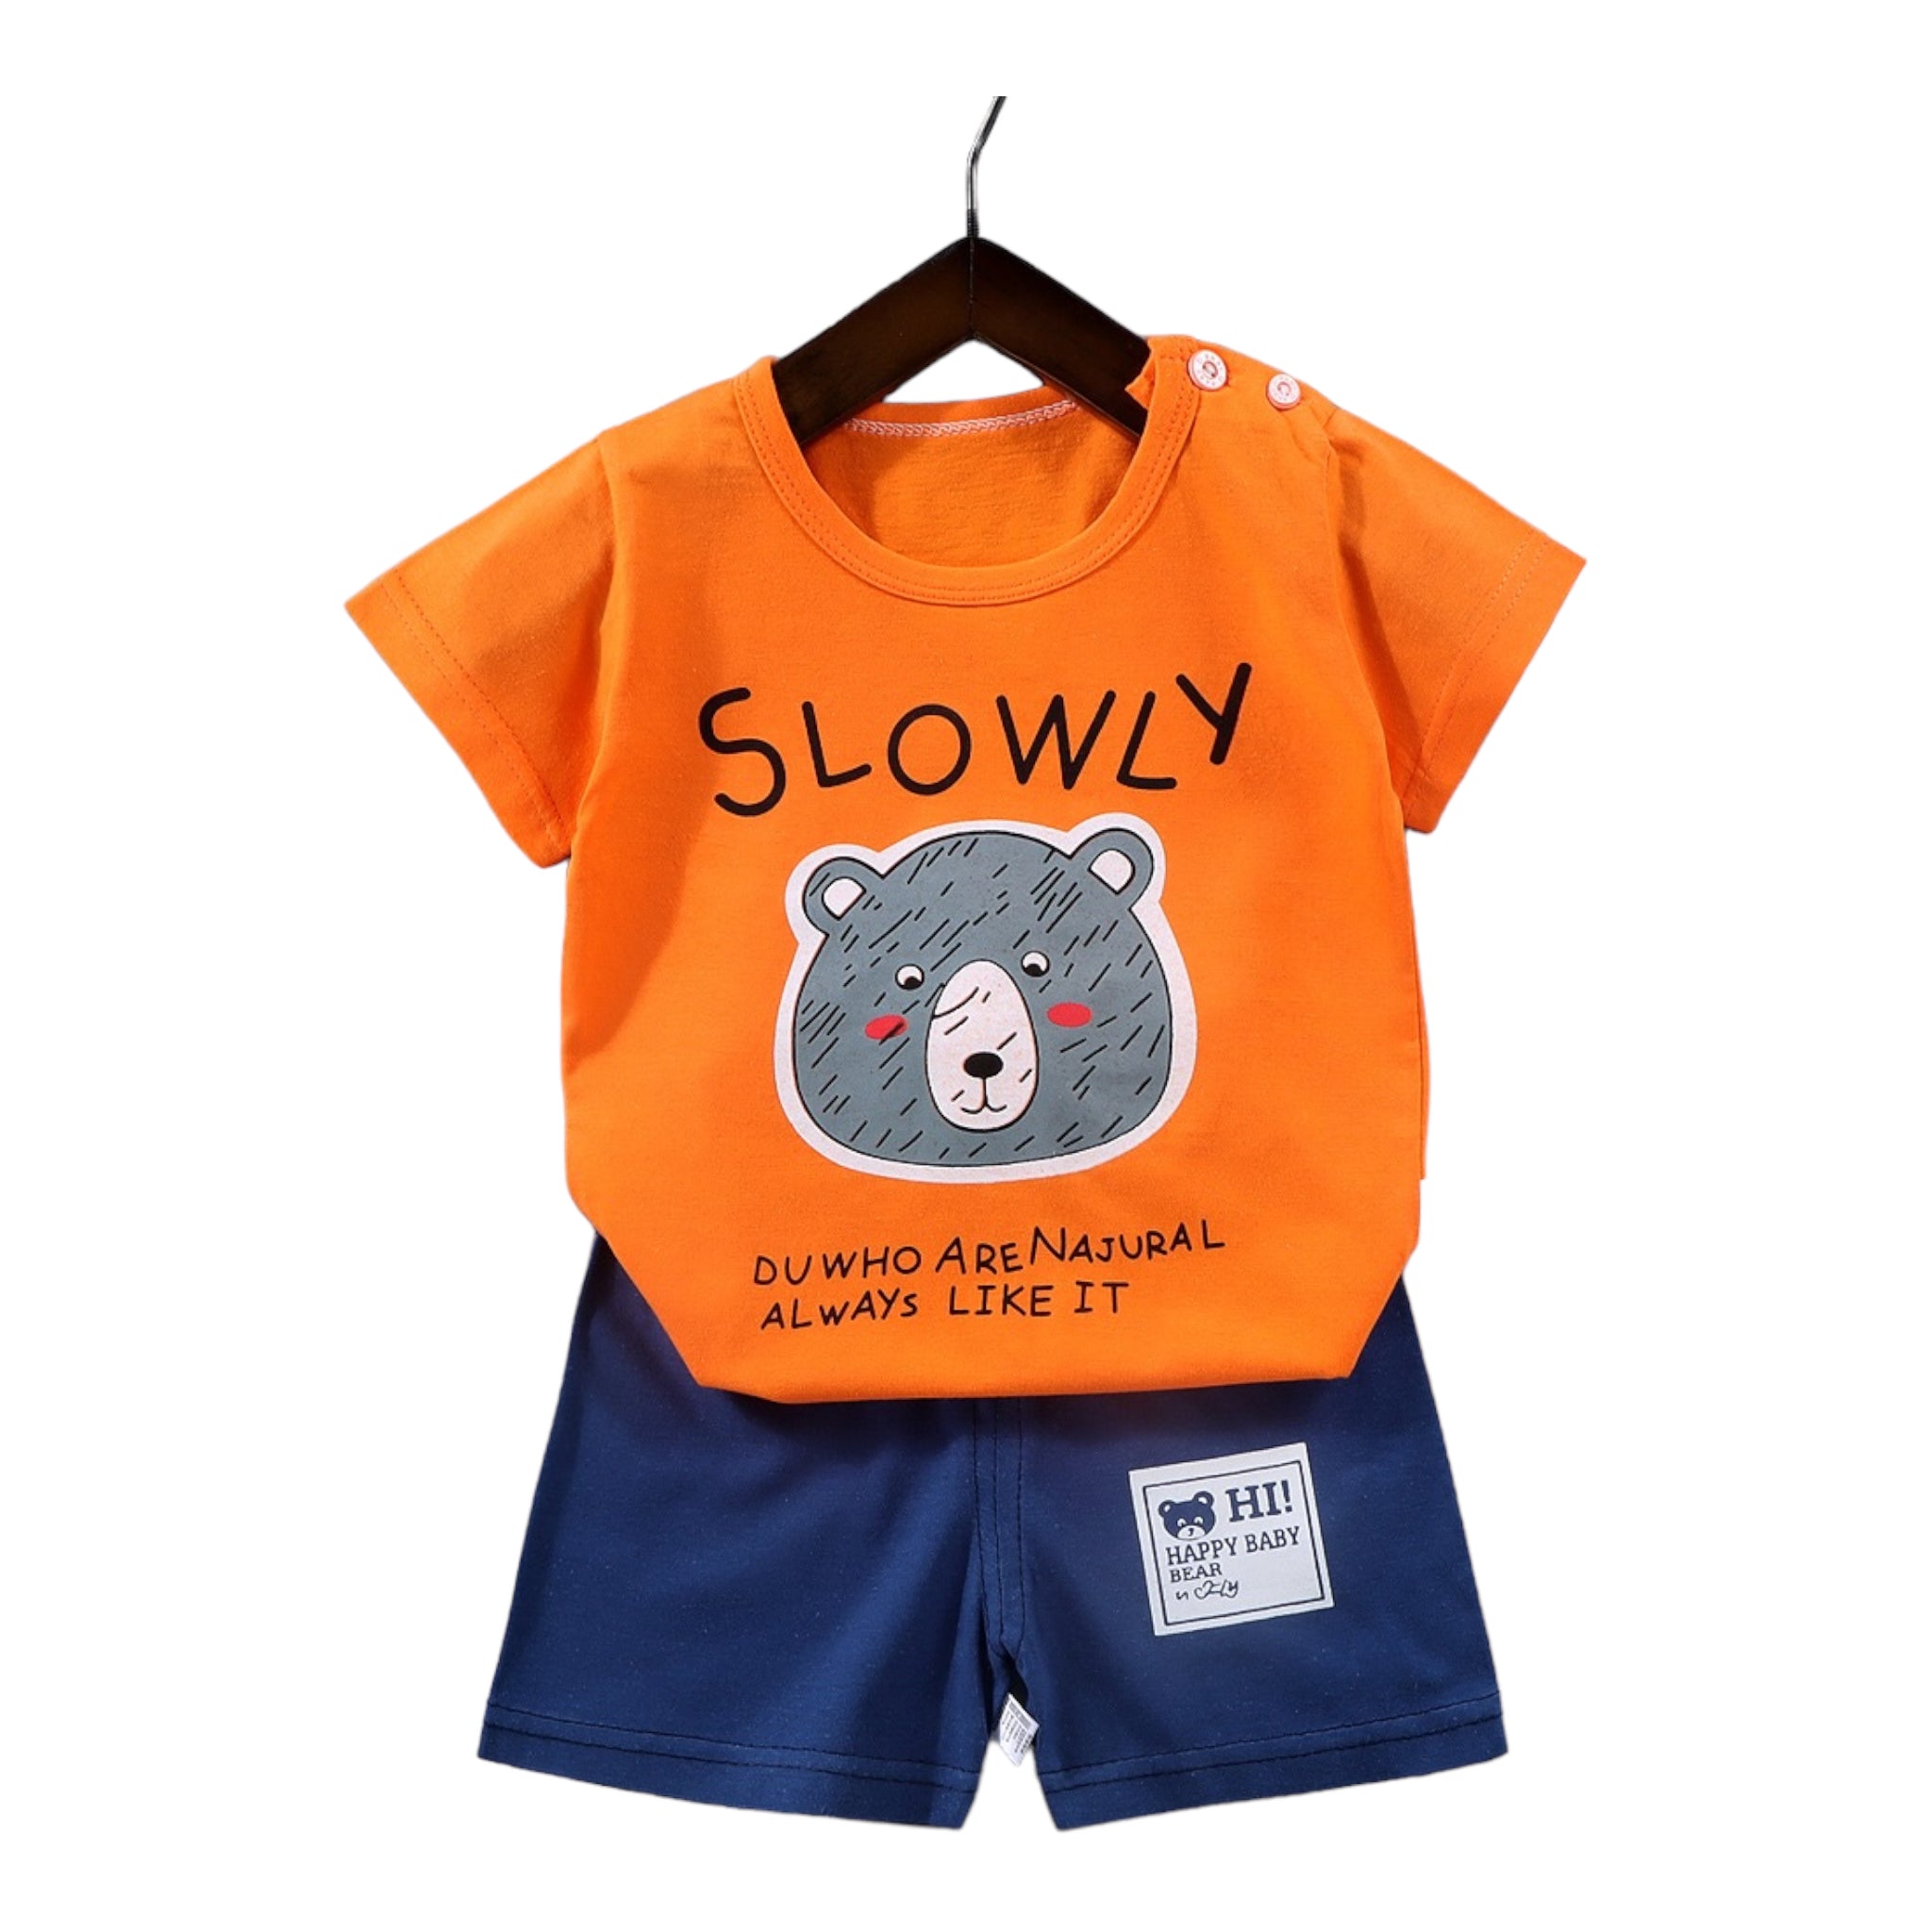 Slowly Design with Panda T shirt for toddler Baby Ara